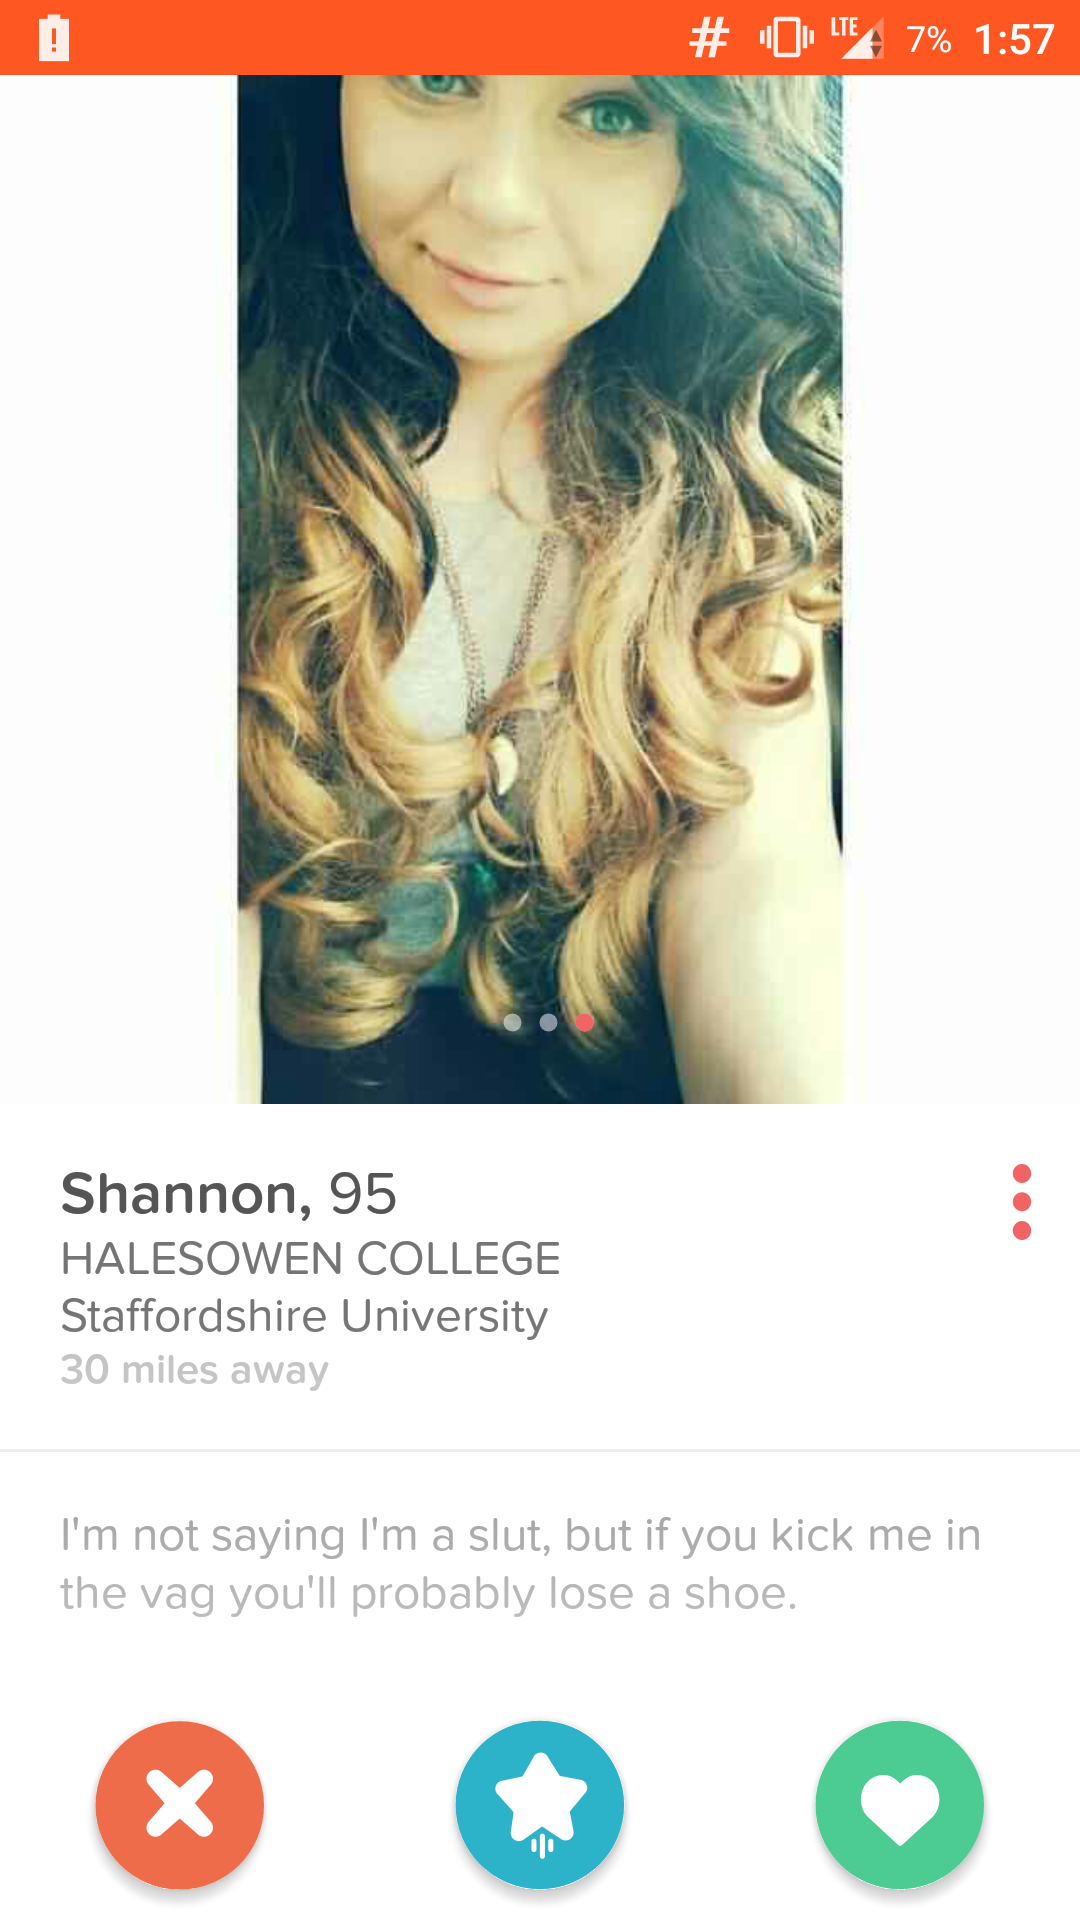 girl - # 0 % 7% Shannon, 95 Halesowen College Staffordshire University 30 miles away I'm not saying I'm a slut, but if you kick me in the vag you'll probably lose a shoe